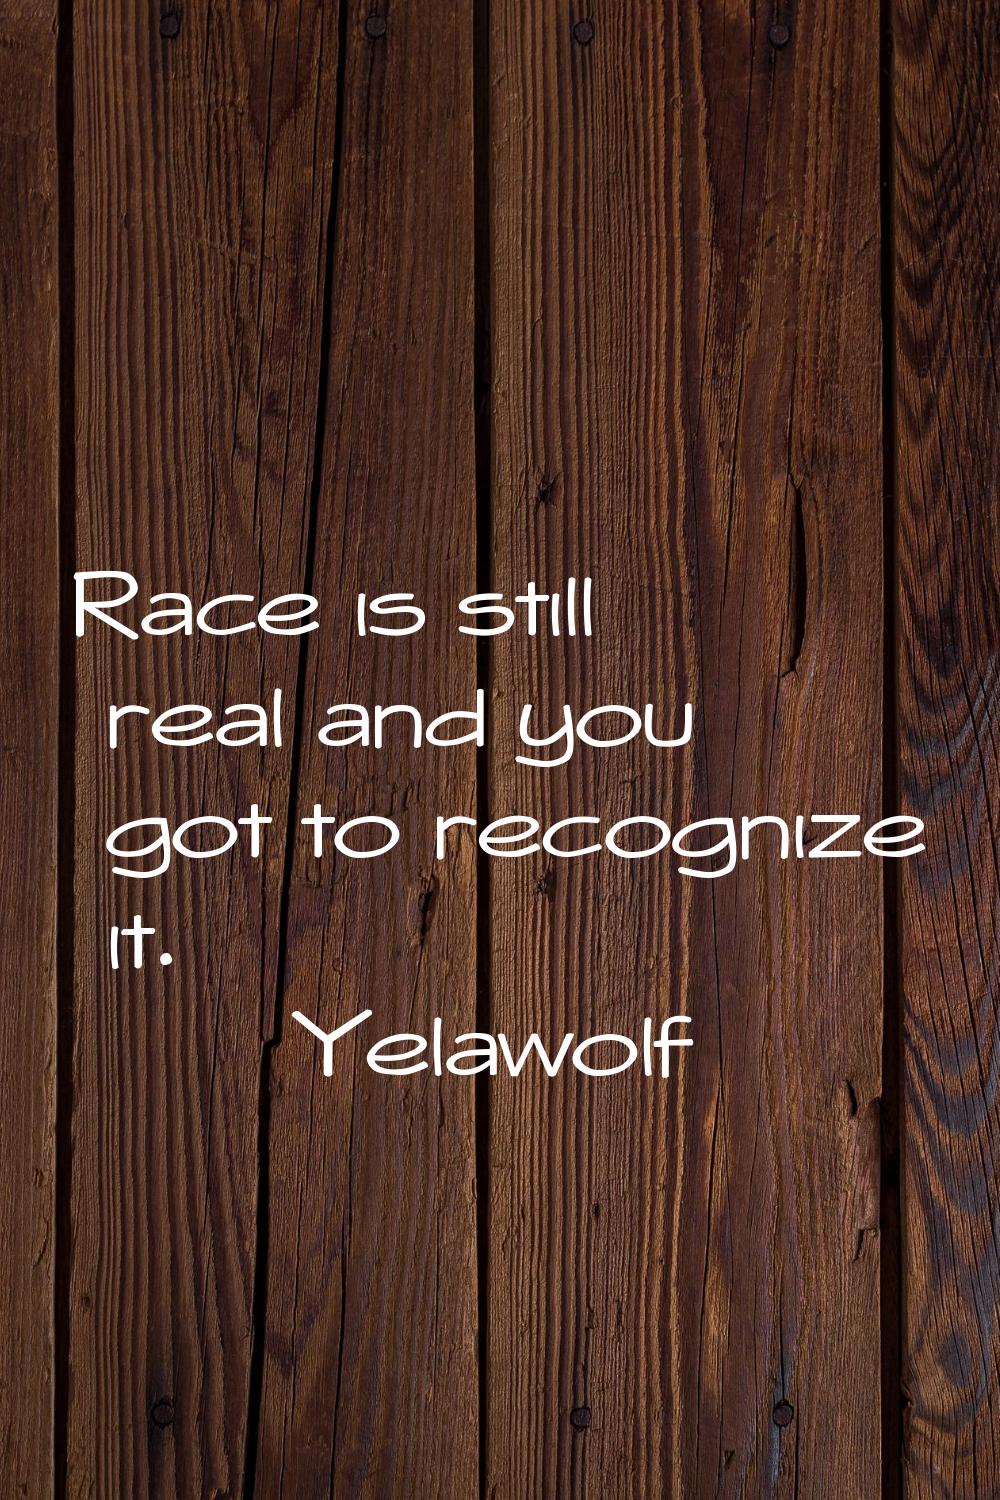 Race is still real and you got to recognize it.